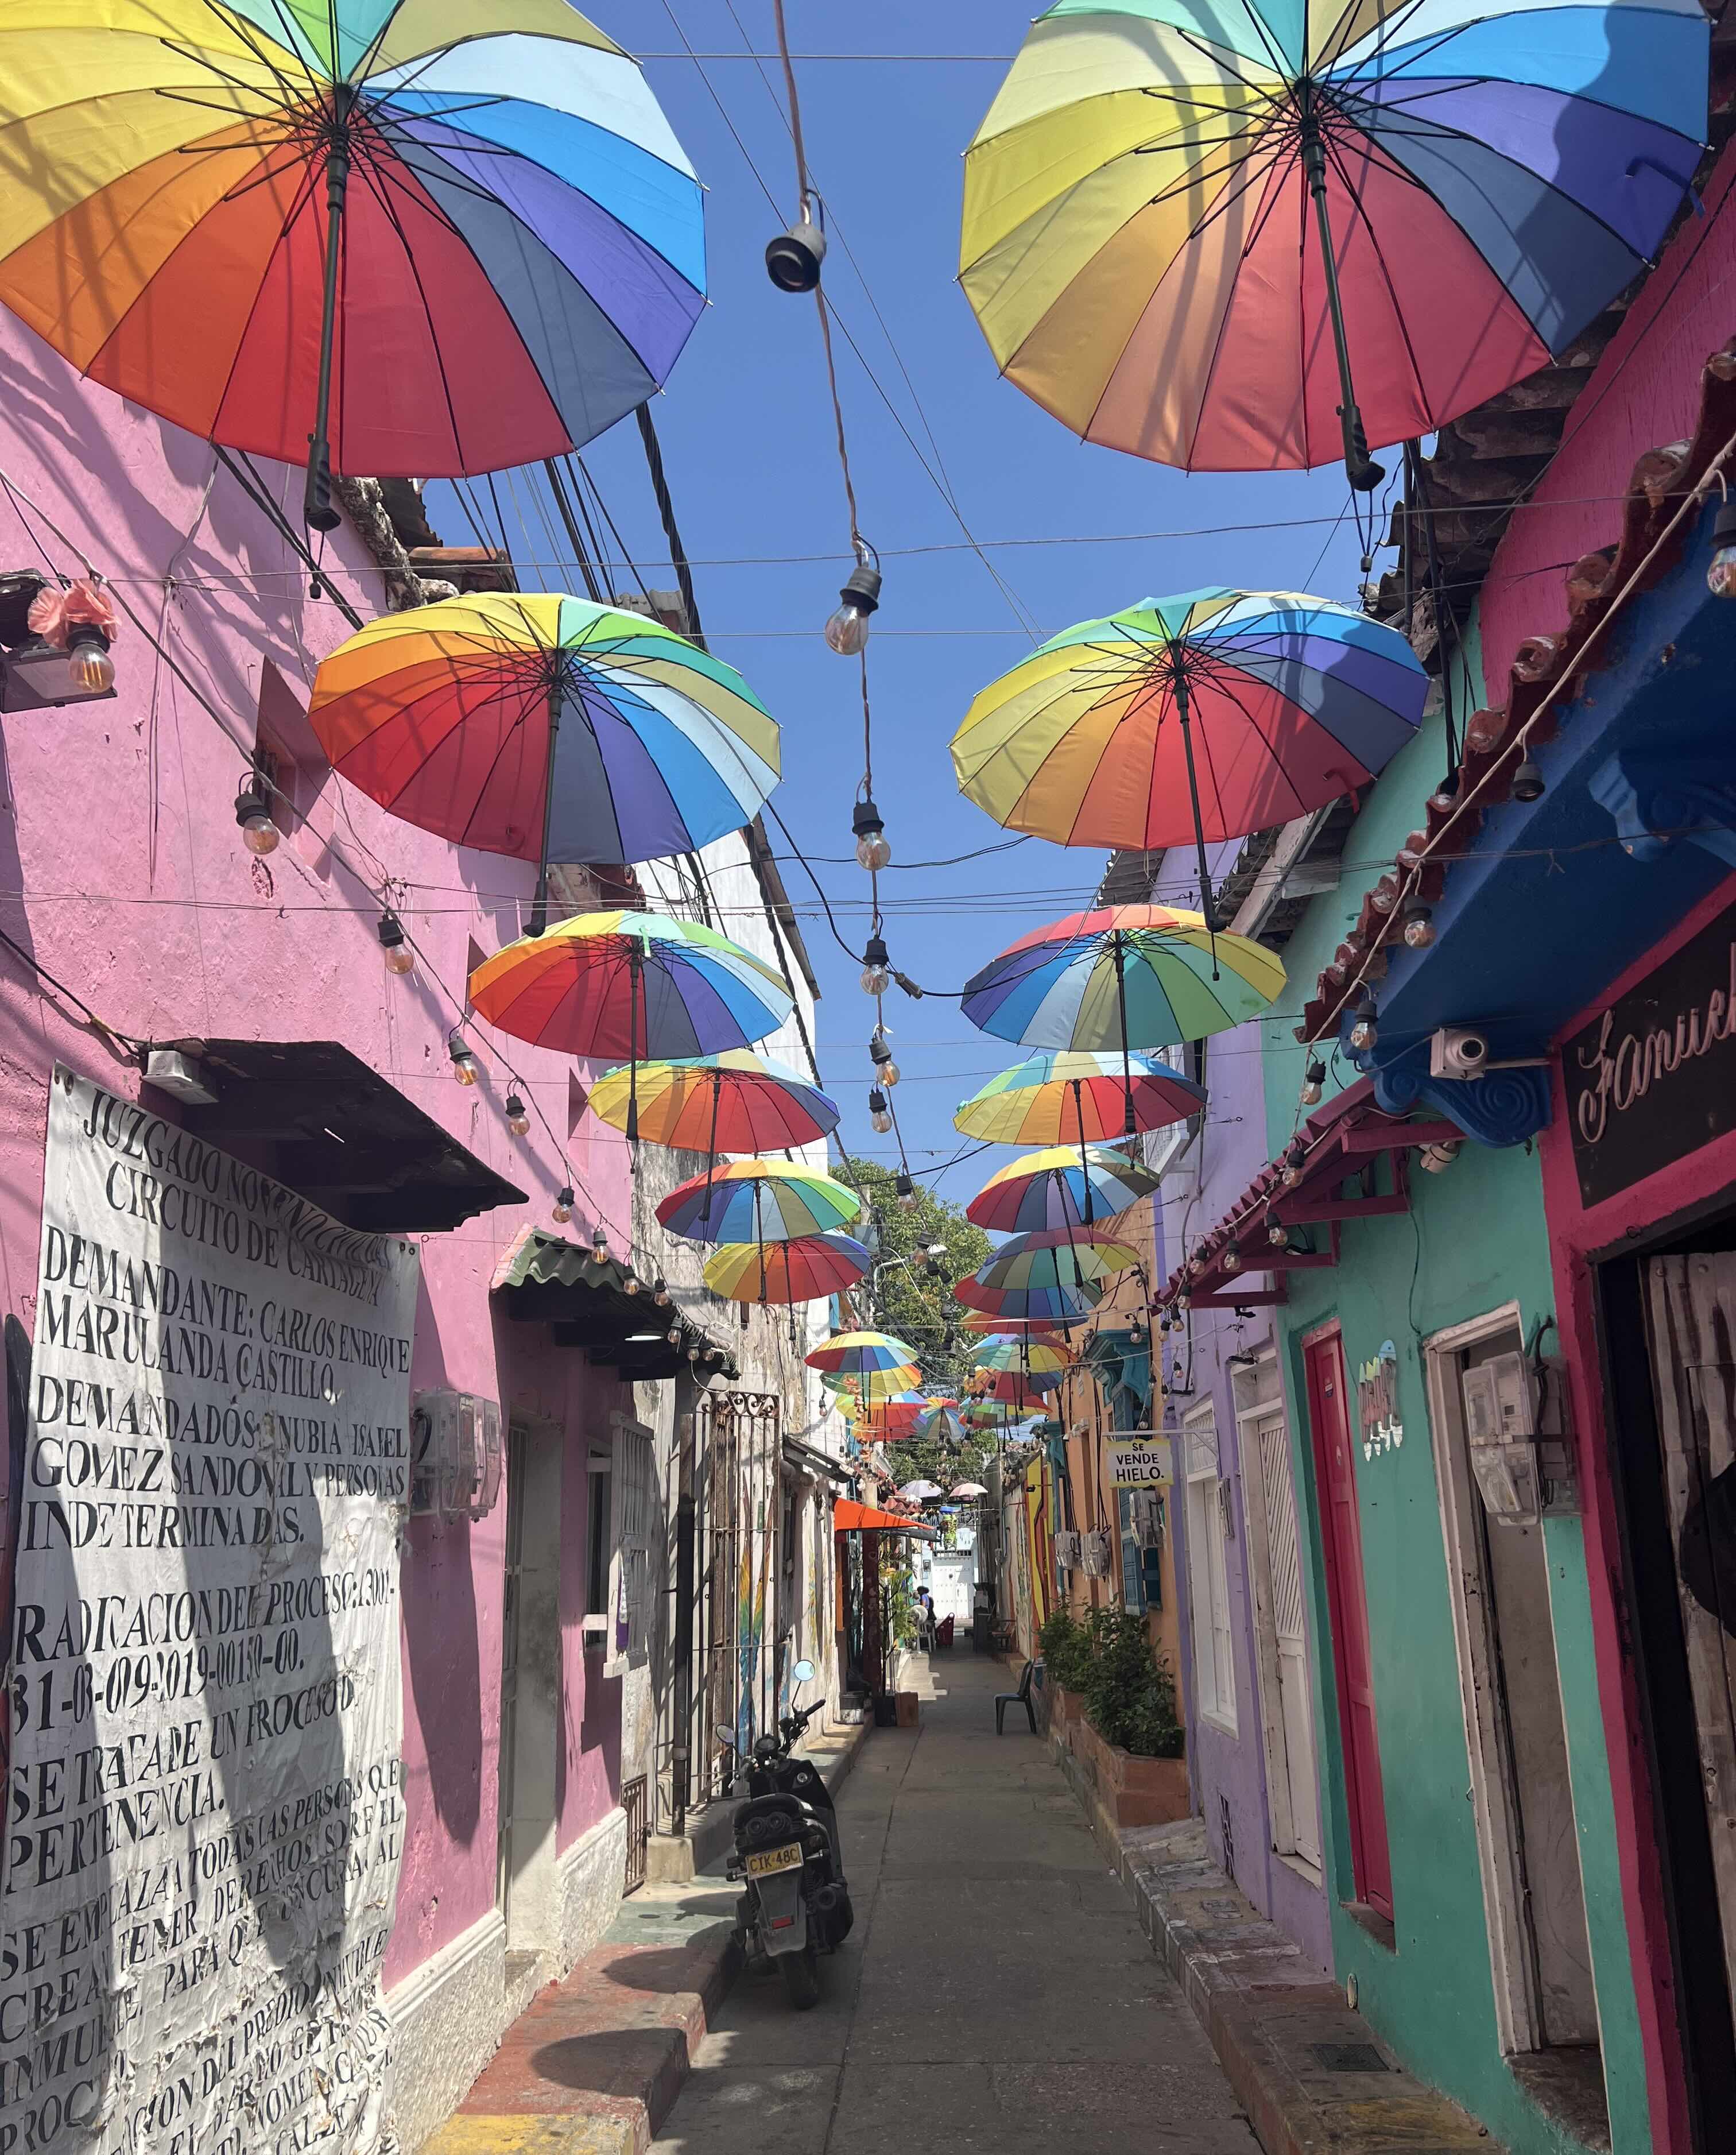 A colorful street in Getsemaní, Colombia, lined with bright umbrellas and colorful buildings.